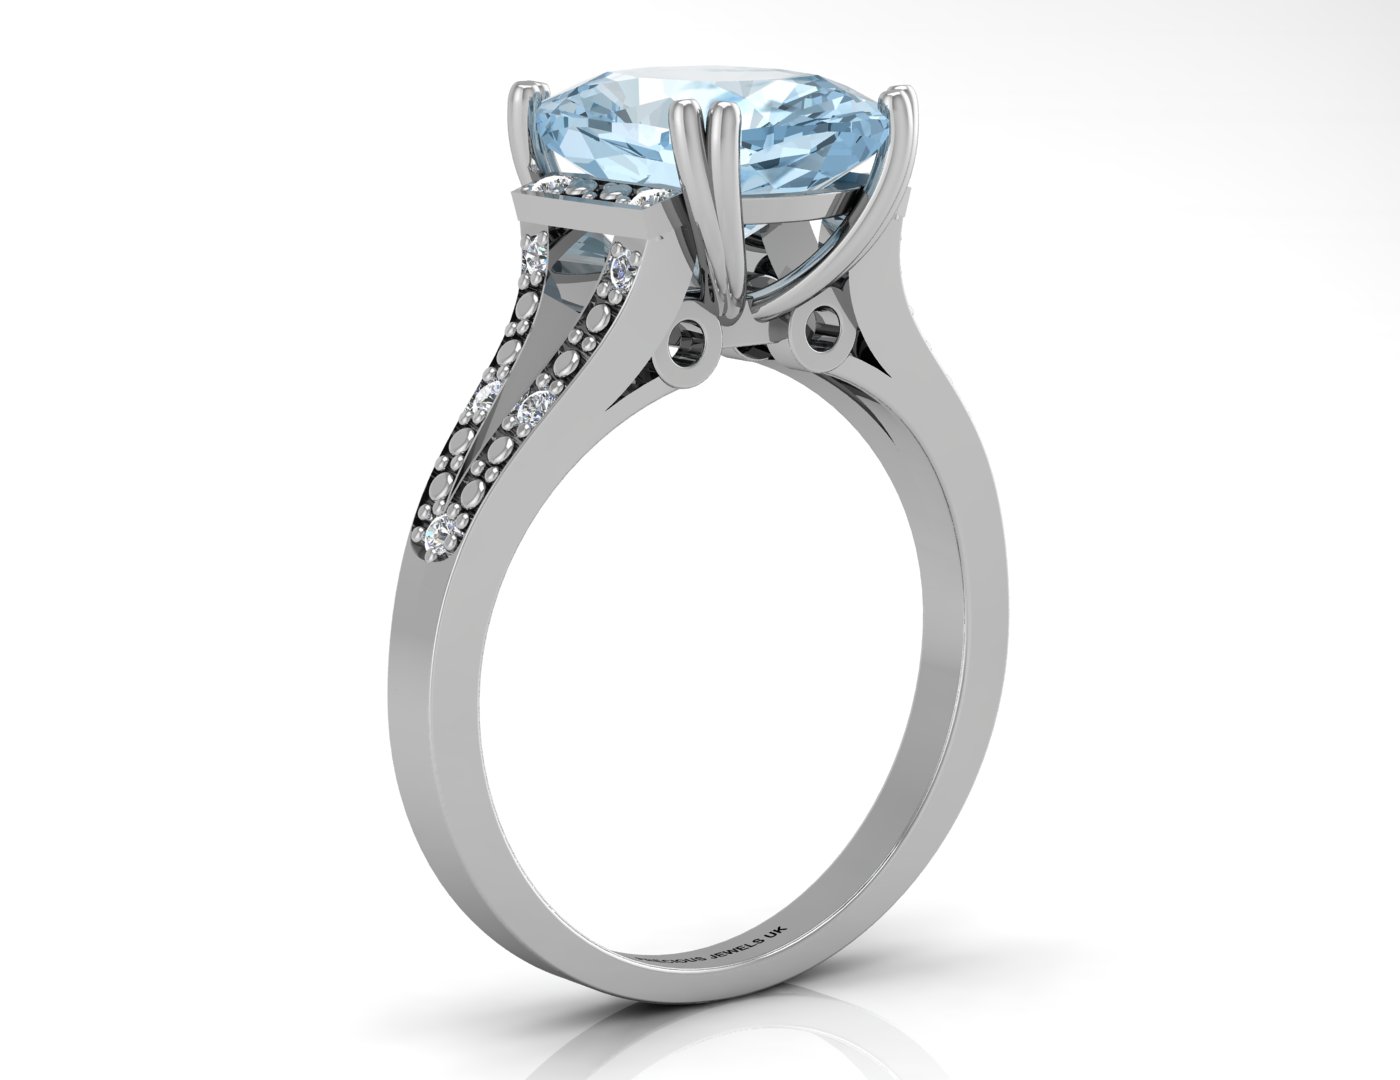 9ct White Gold Diamond And Blue Topaz Ring 0.07 Carats - Image 2 of 5